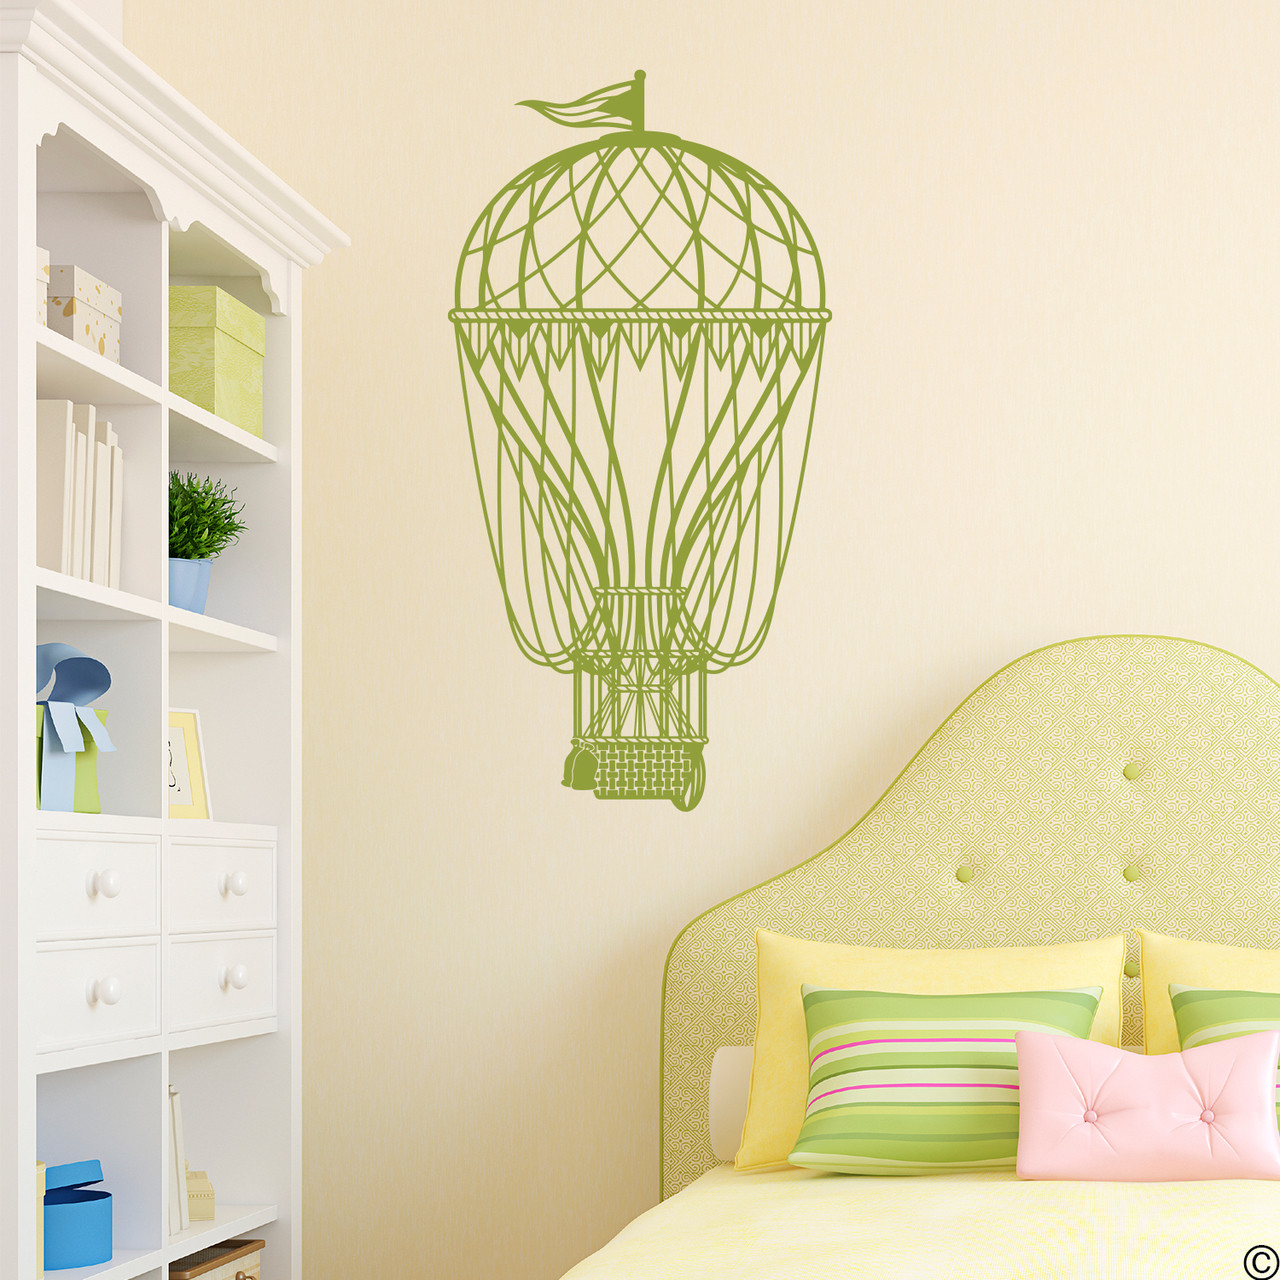 Hot Air Balloon vinyl wall decal in olive